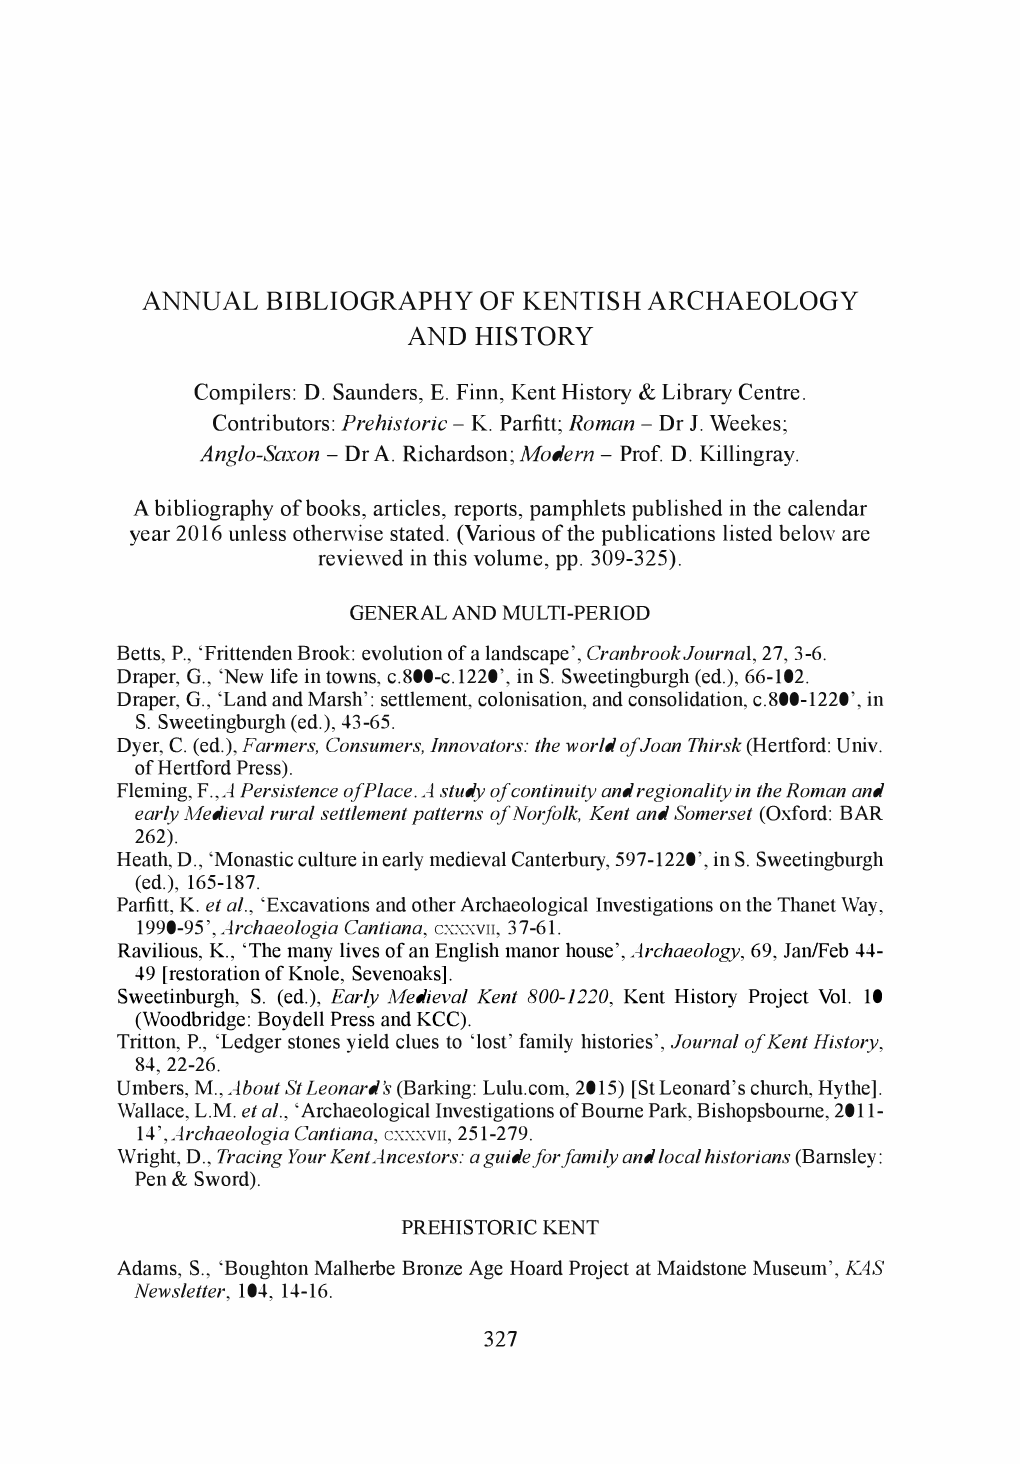 Annual Bibliography of Kentish Archaeology and History